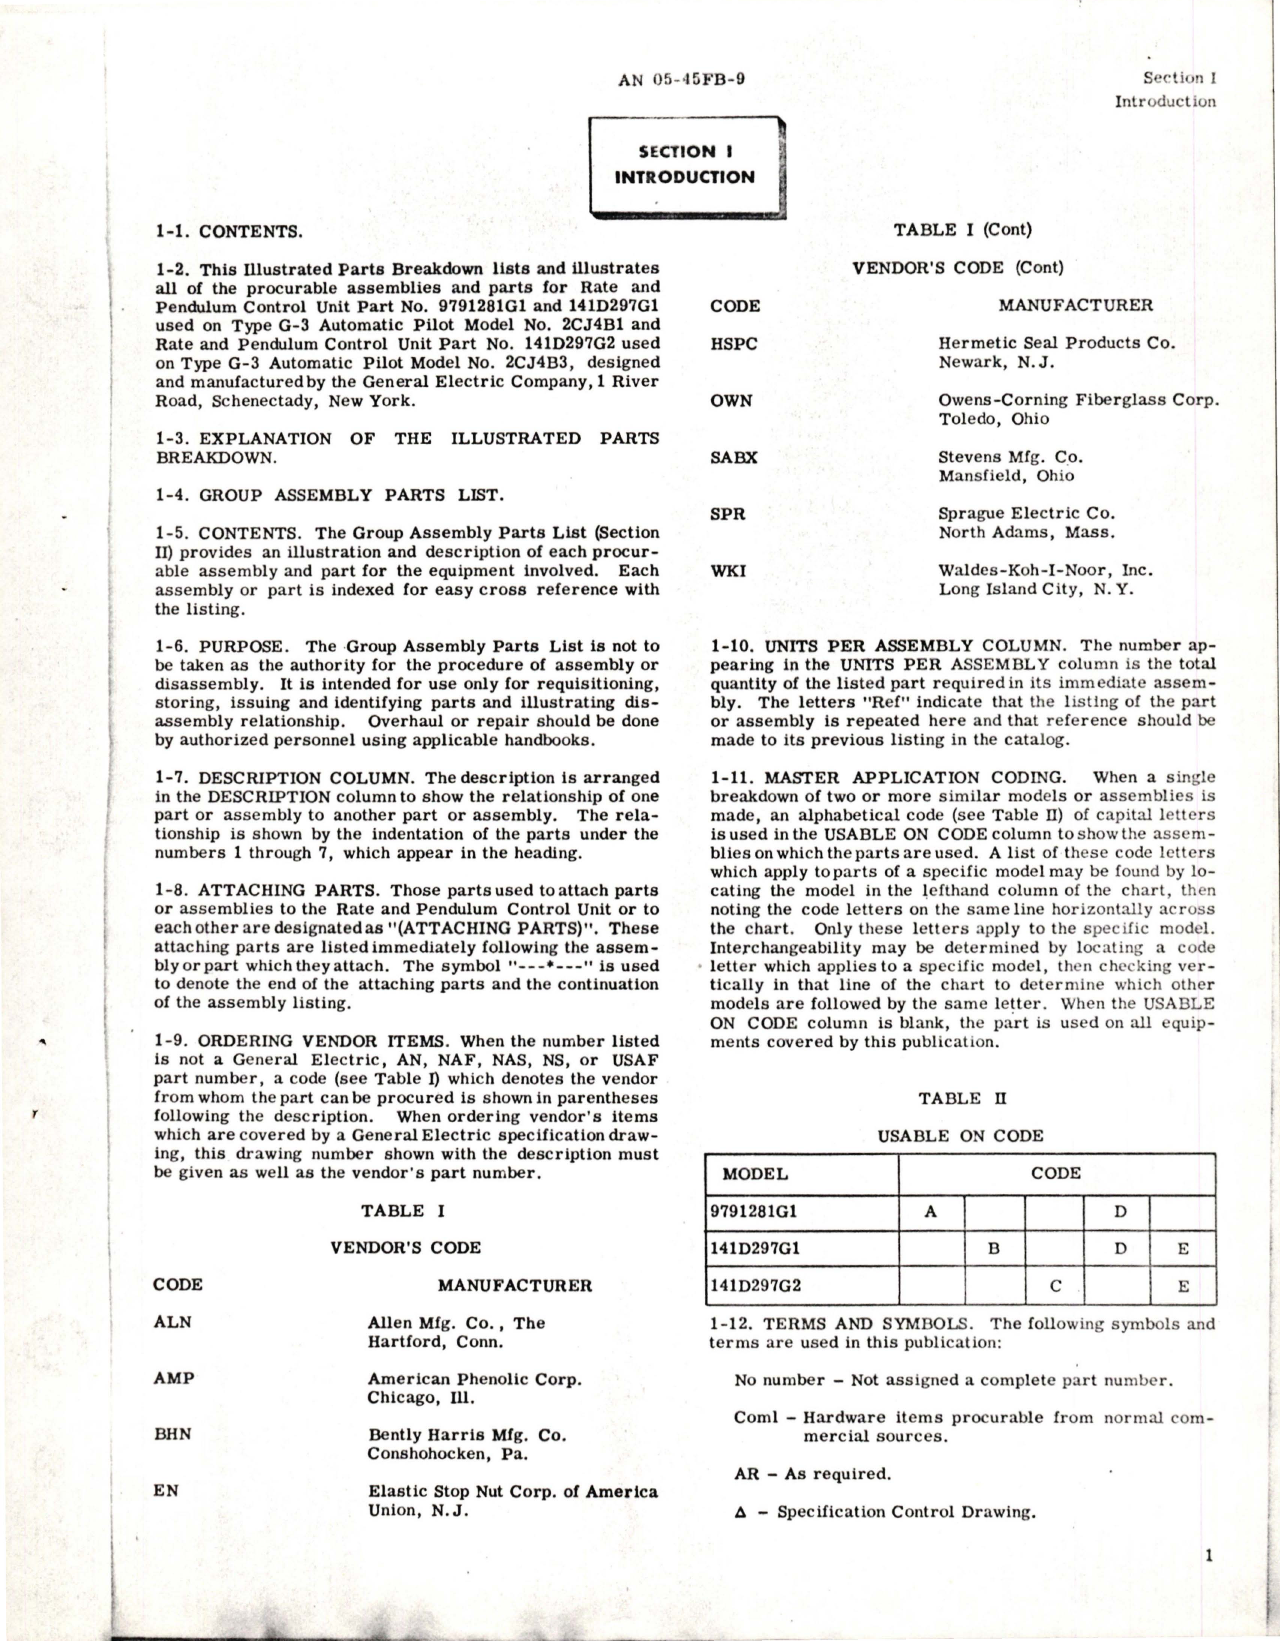 Sample page 5 from AirCorps Library document: Illustrated Parts Breakdown for Rate and Pendulum Control Unit - Parts 9791281G1, 141D297G1, 141D297G2 for G-3 Auto Pilot Model 2CJ4B1 and 2CJ4B3